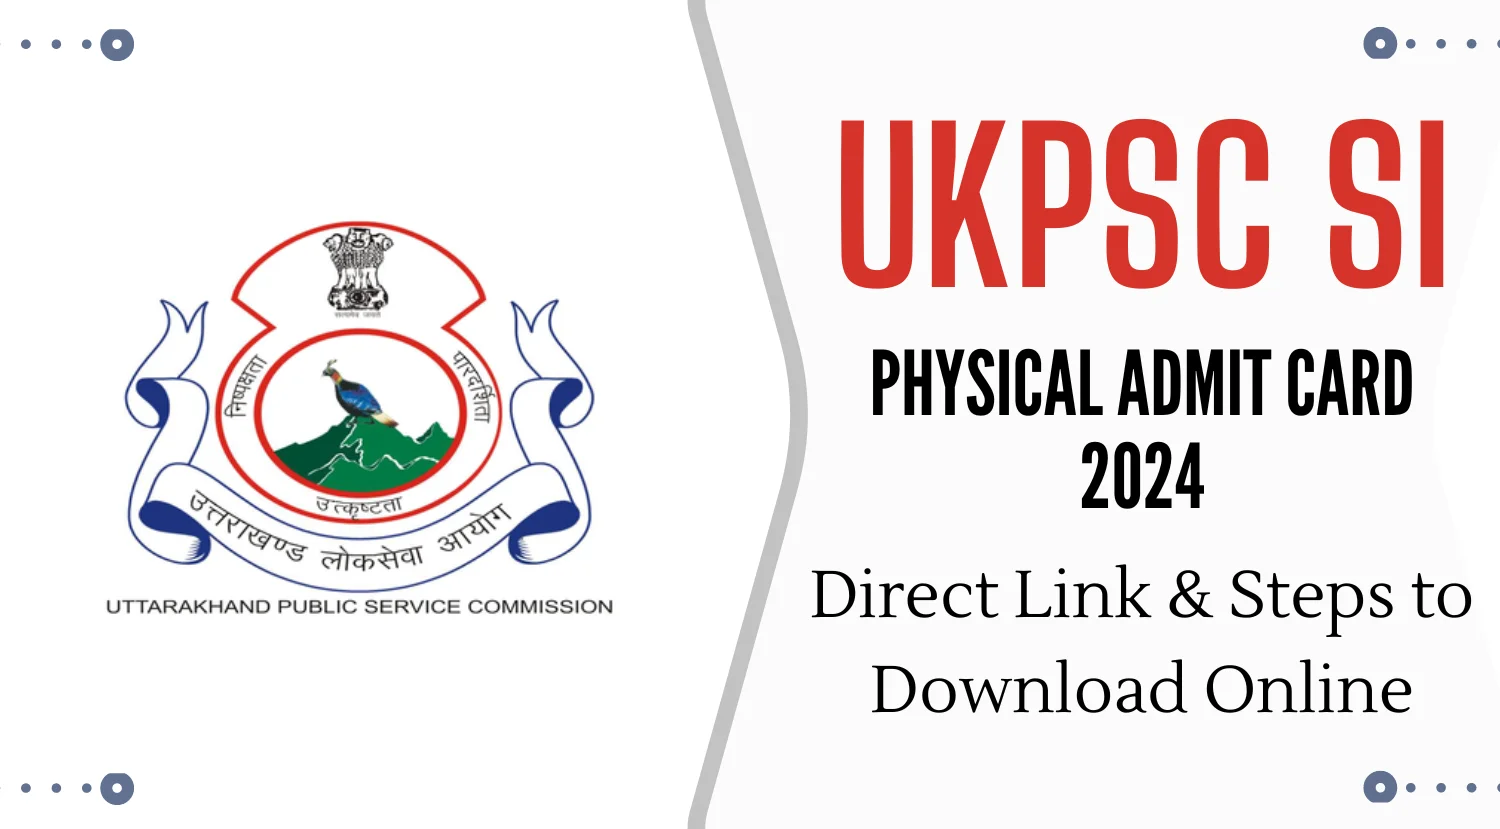 UKPSC SI Physical Admit Card 2024 Direct Link Steps to Download Online